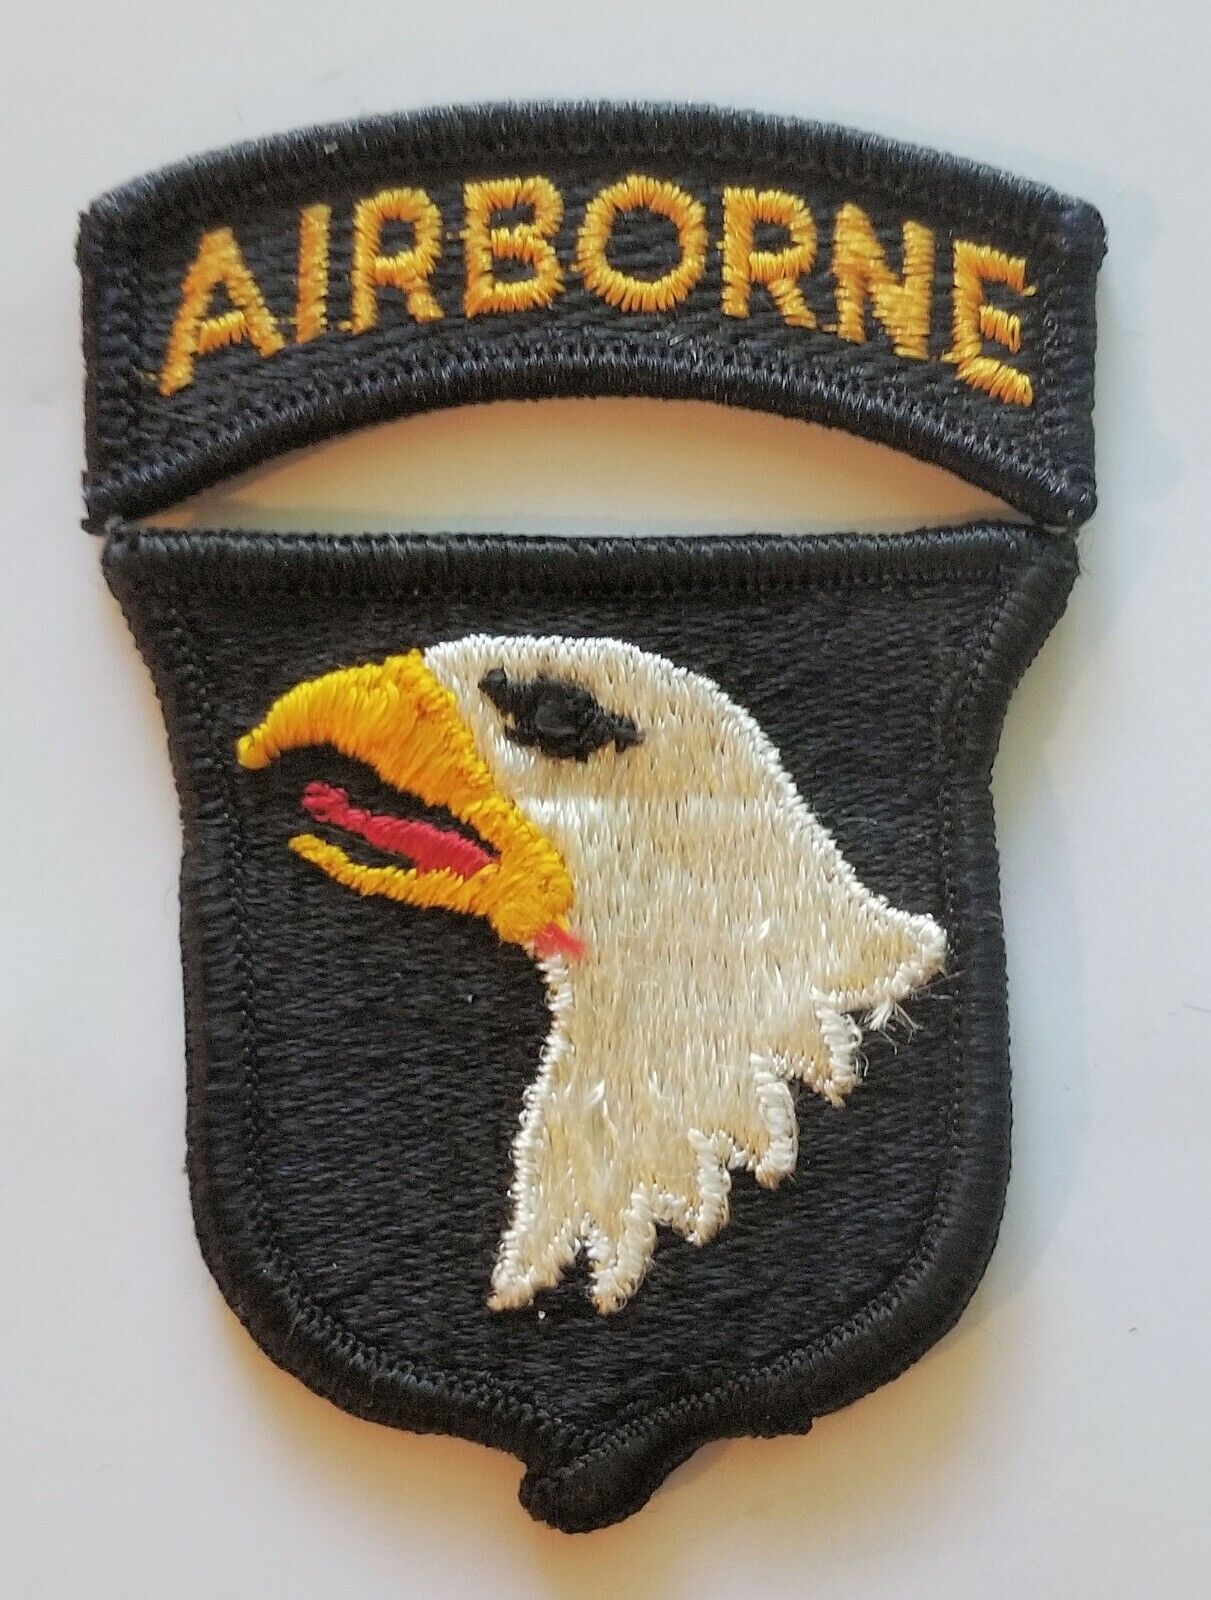 US ARMY 101ST AIRBORNE DIVISION WITH AIRBORNE TAB PATCH - US GOV'T ISSUE USGI